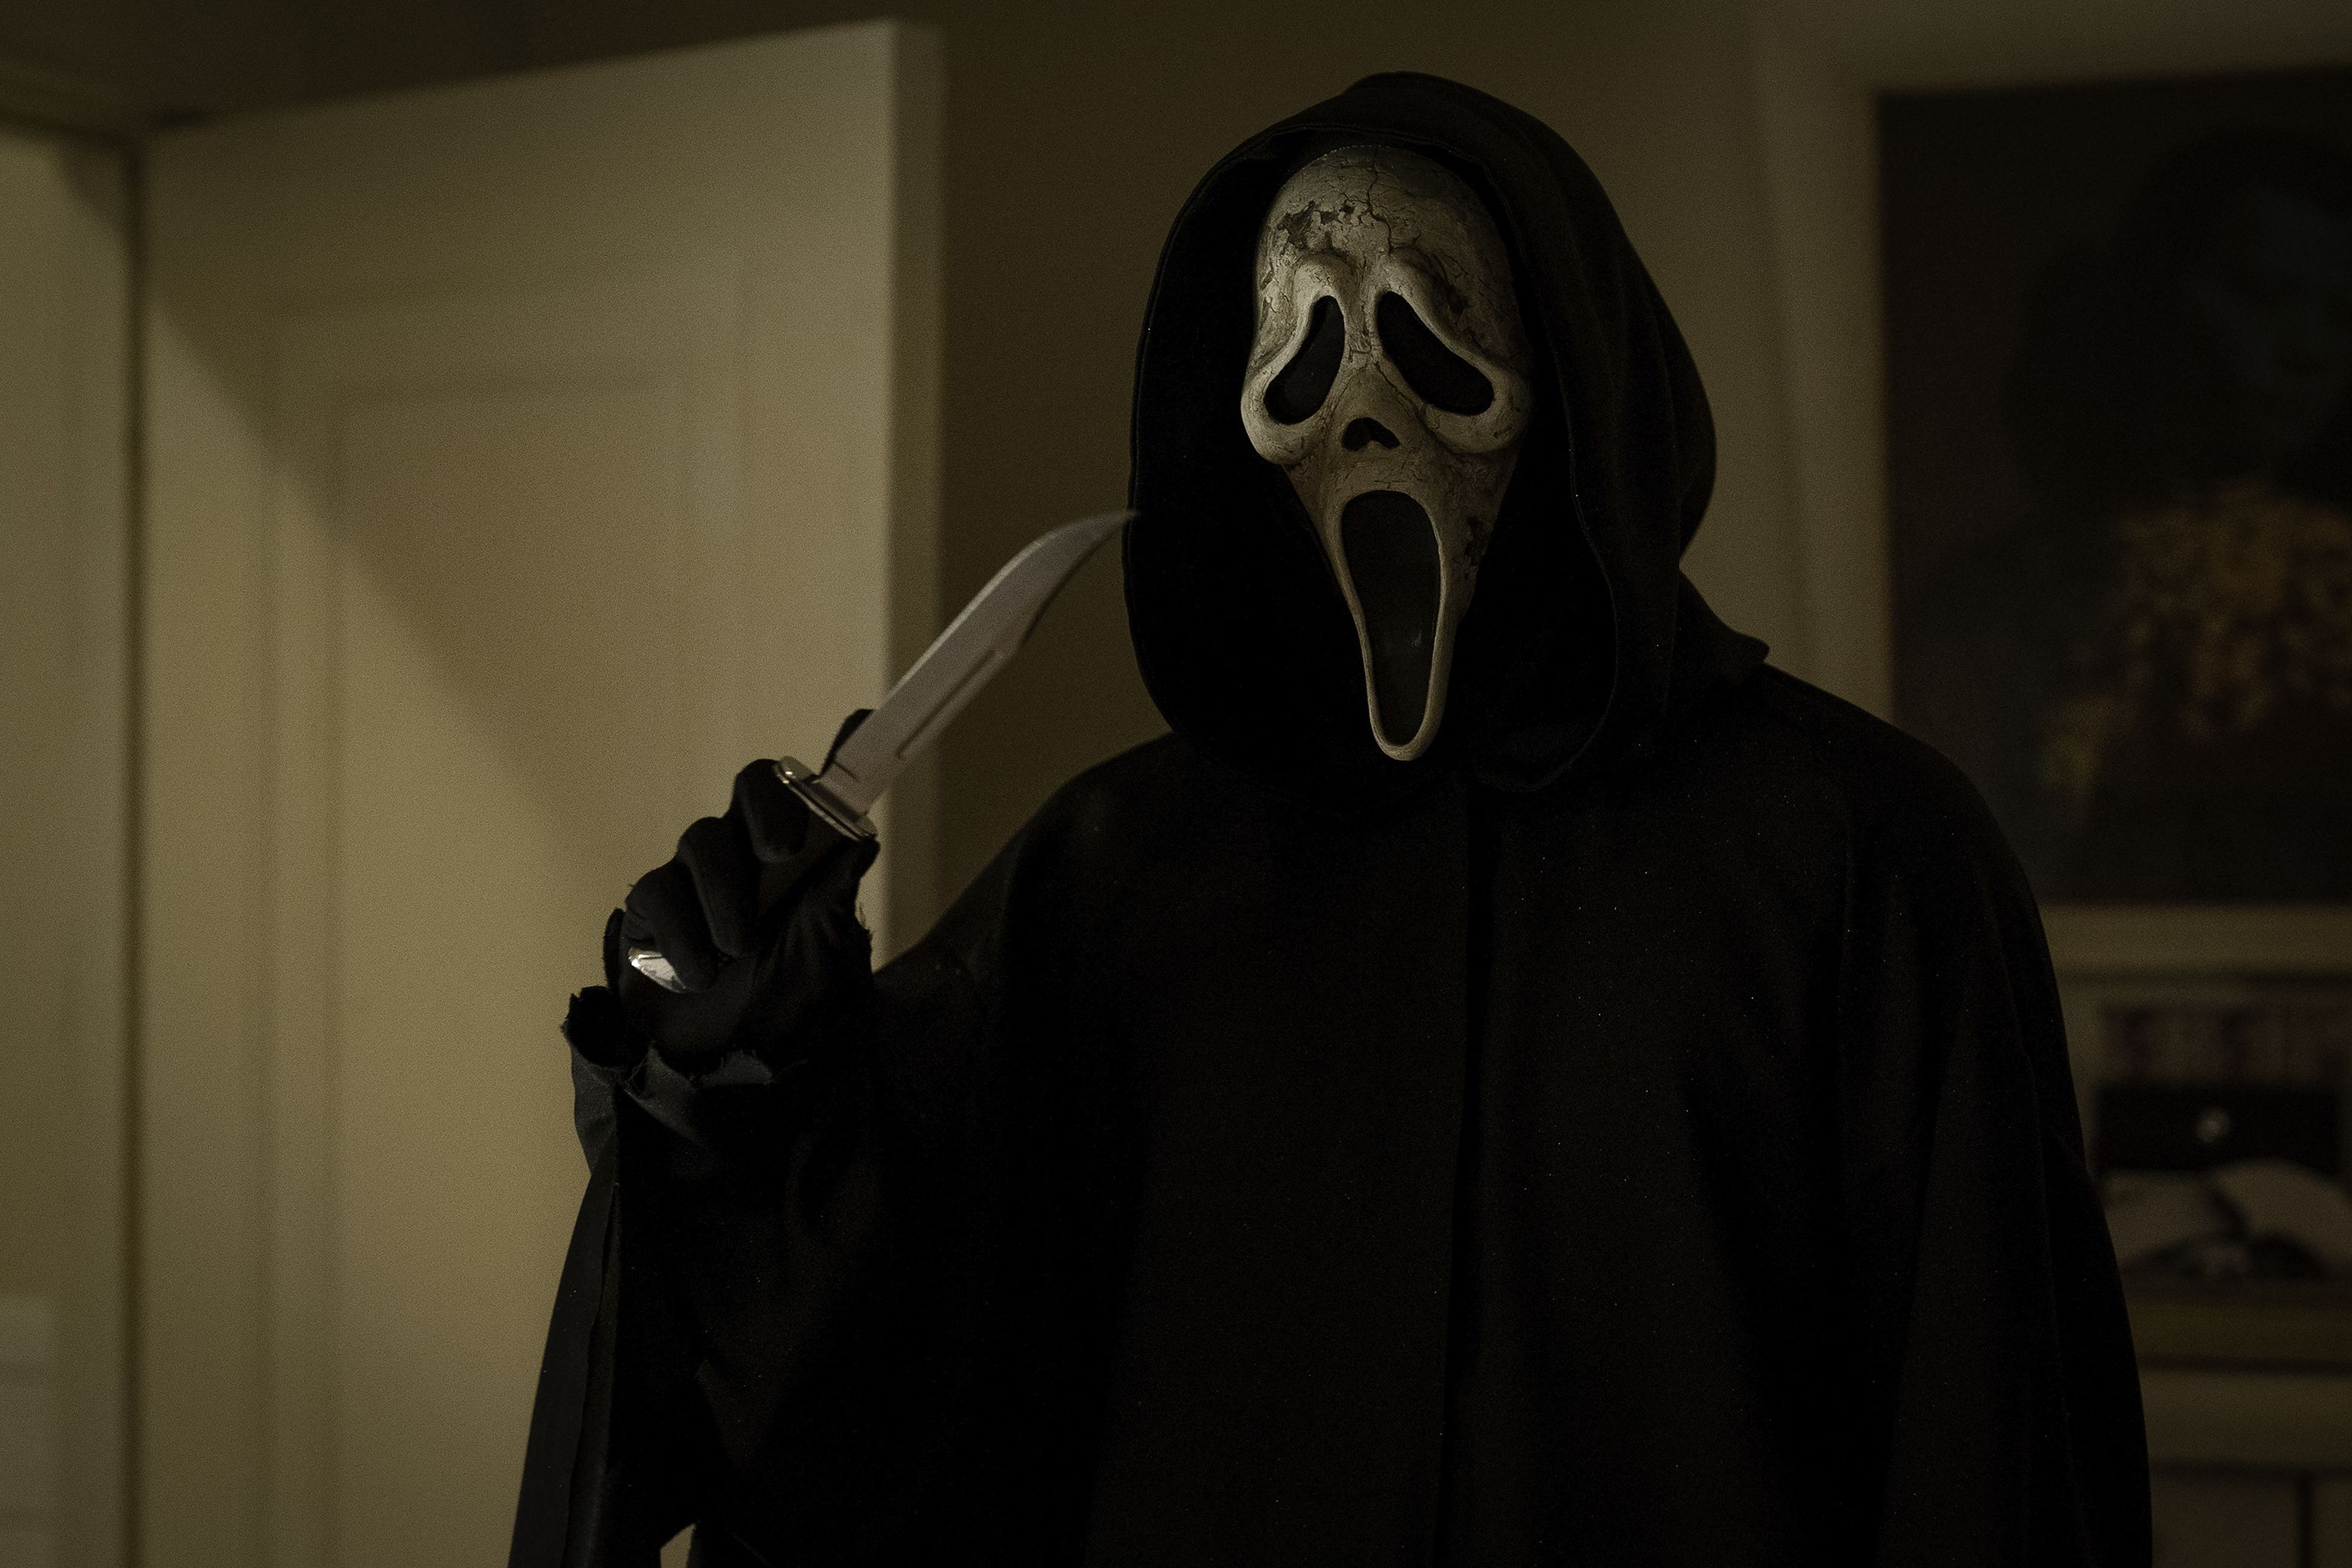 Everything We Know About Scream (2022): First Trailer Released